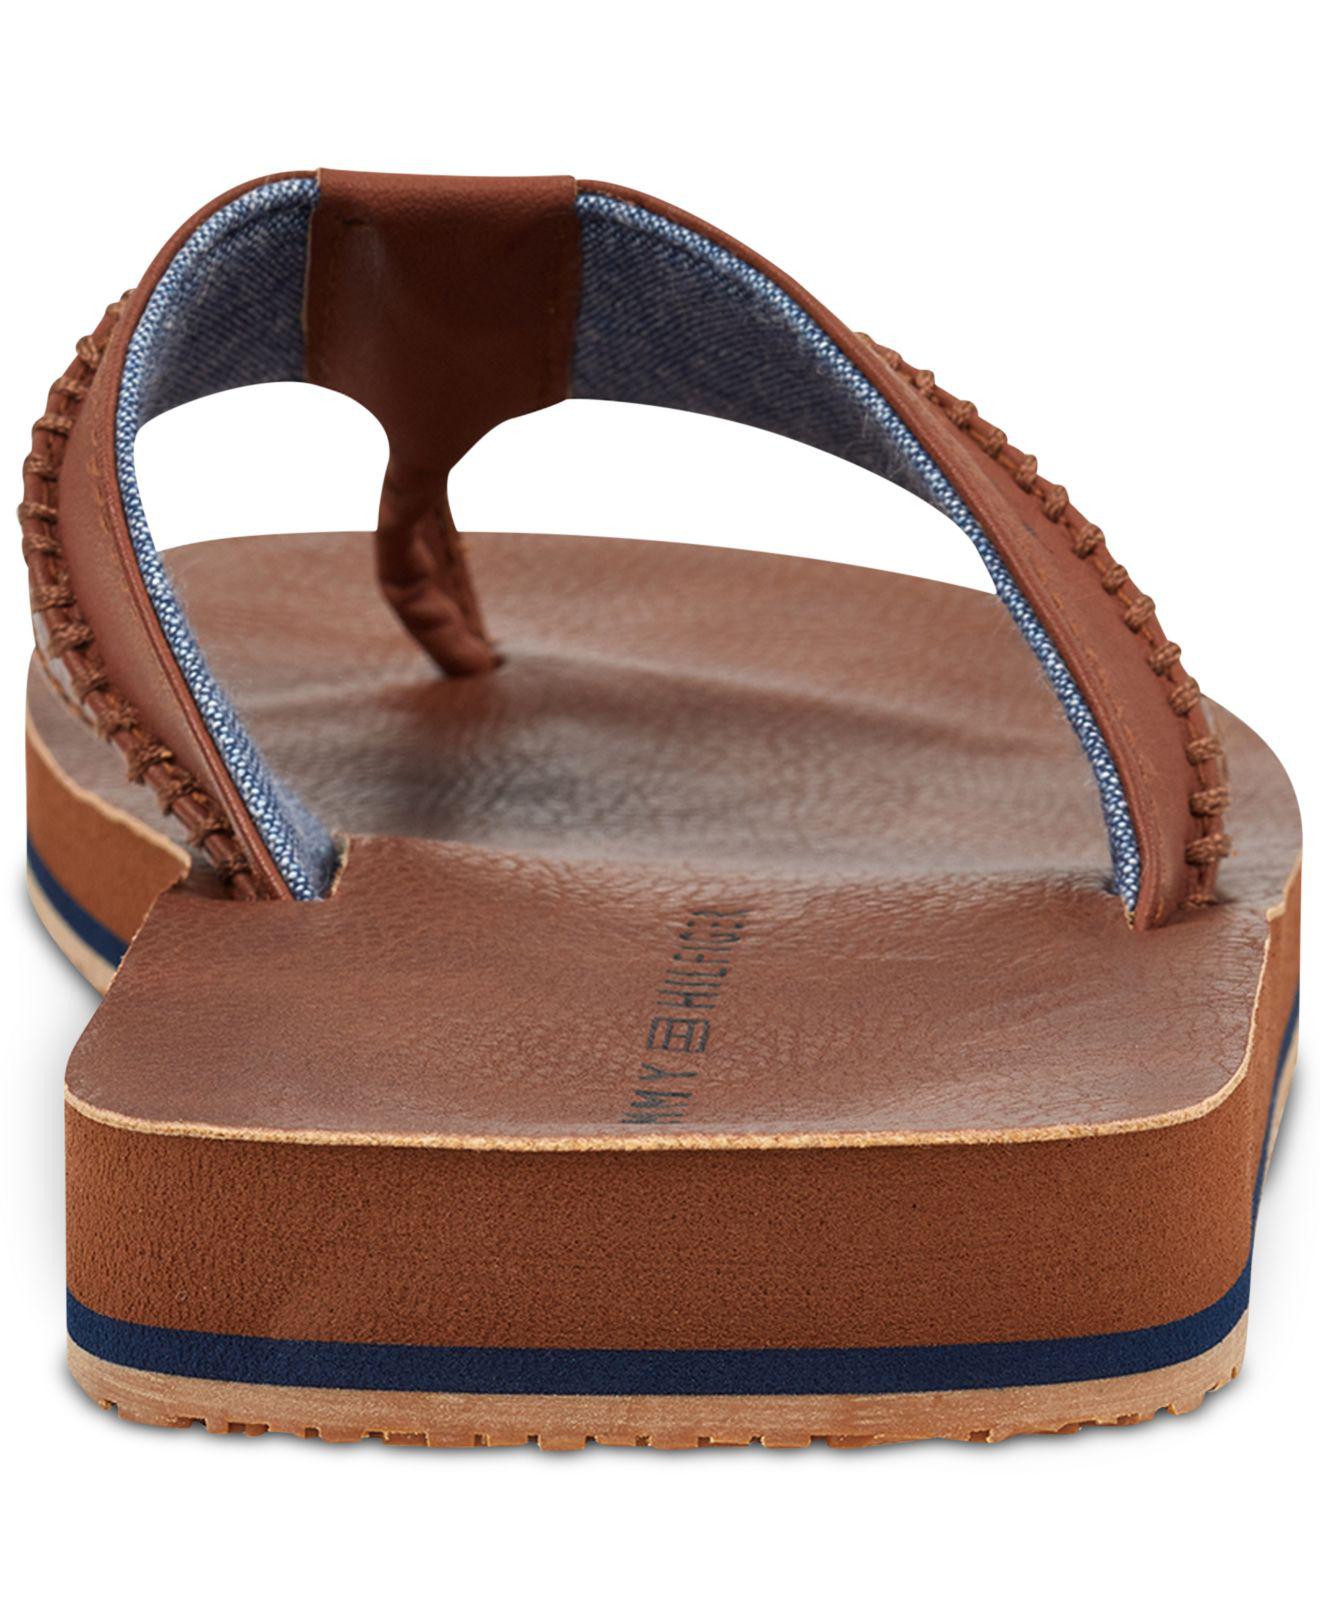 tommy hilfiger men's dilly thong sandals